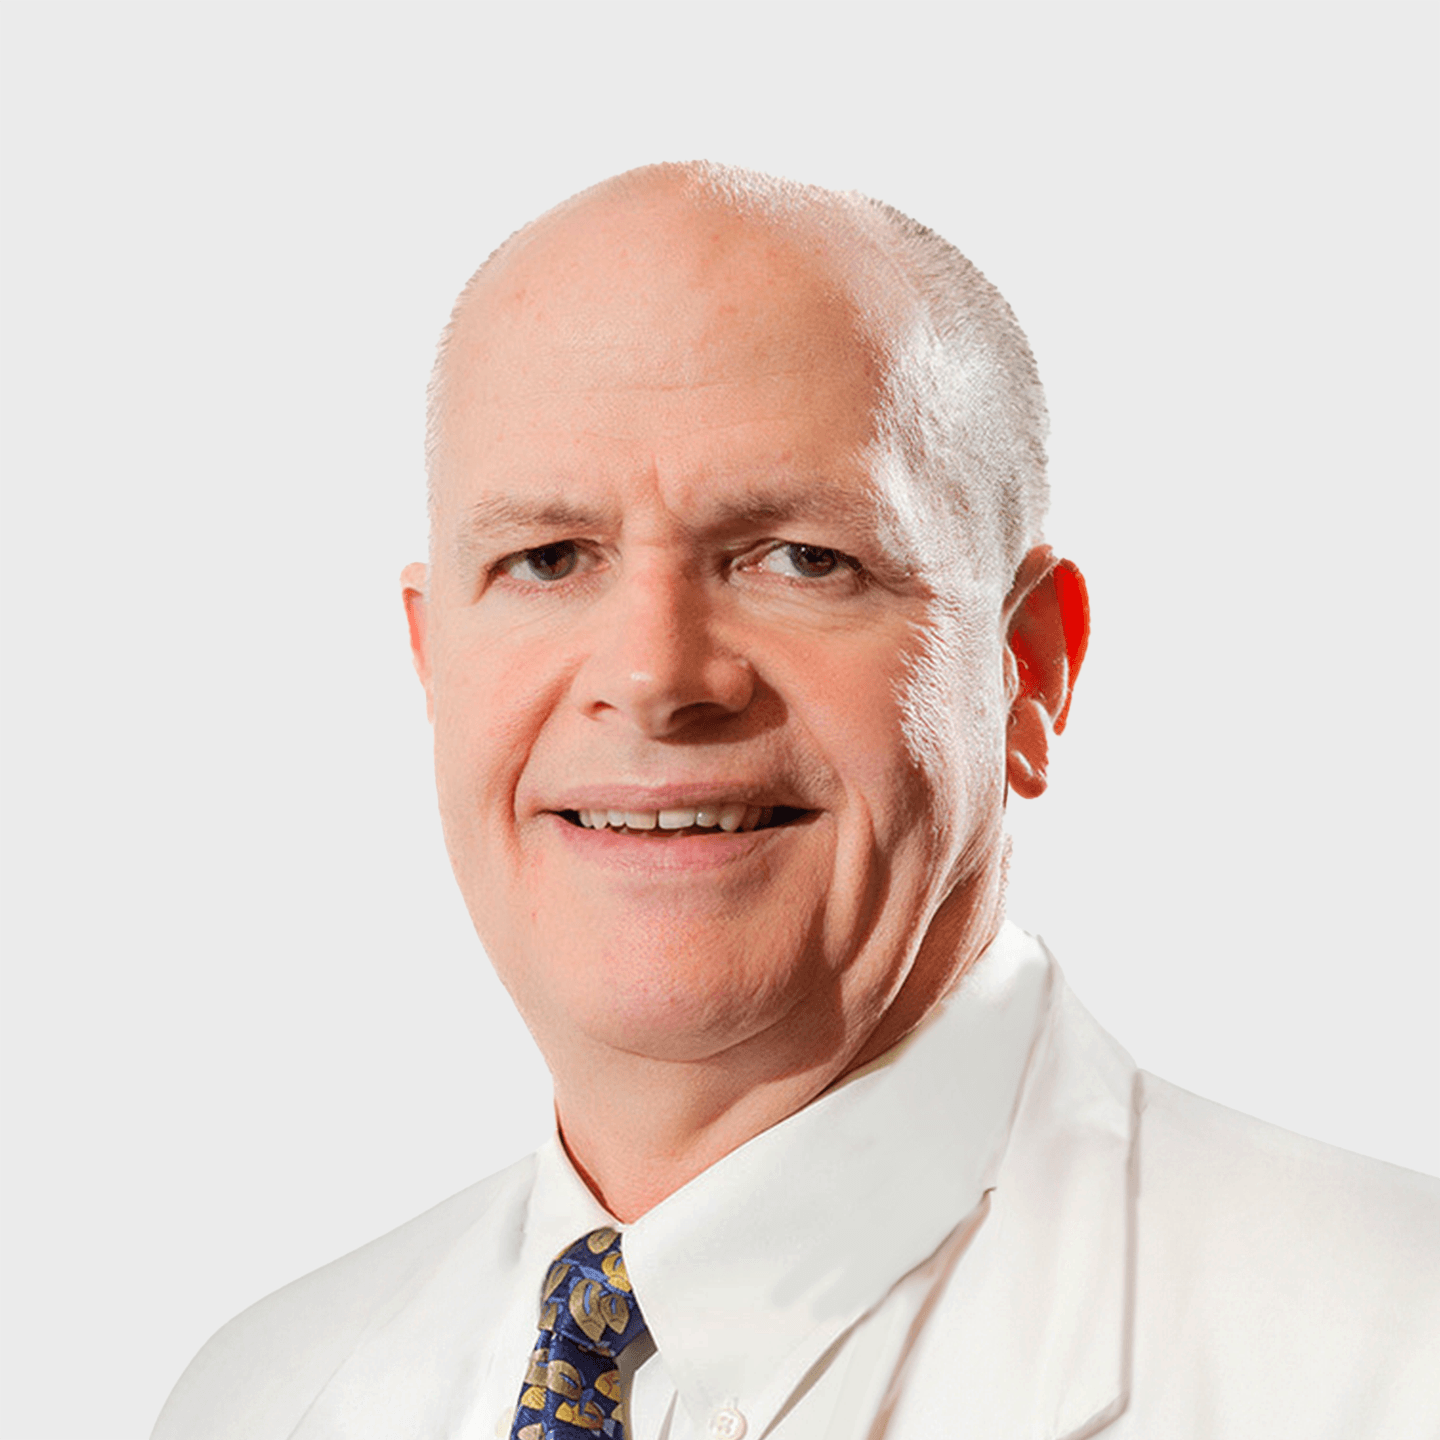 Physician Spotlight on Dr. Sean J. O'Donnell